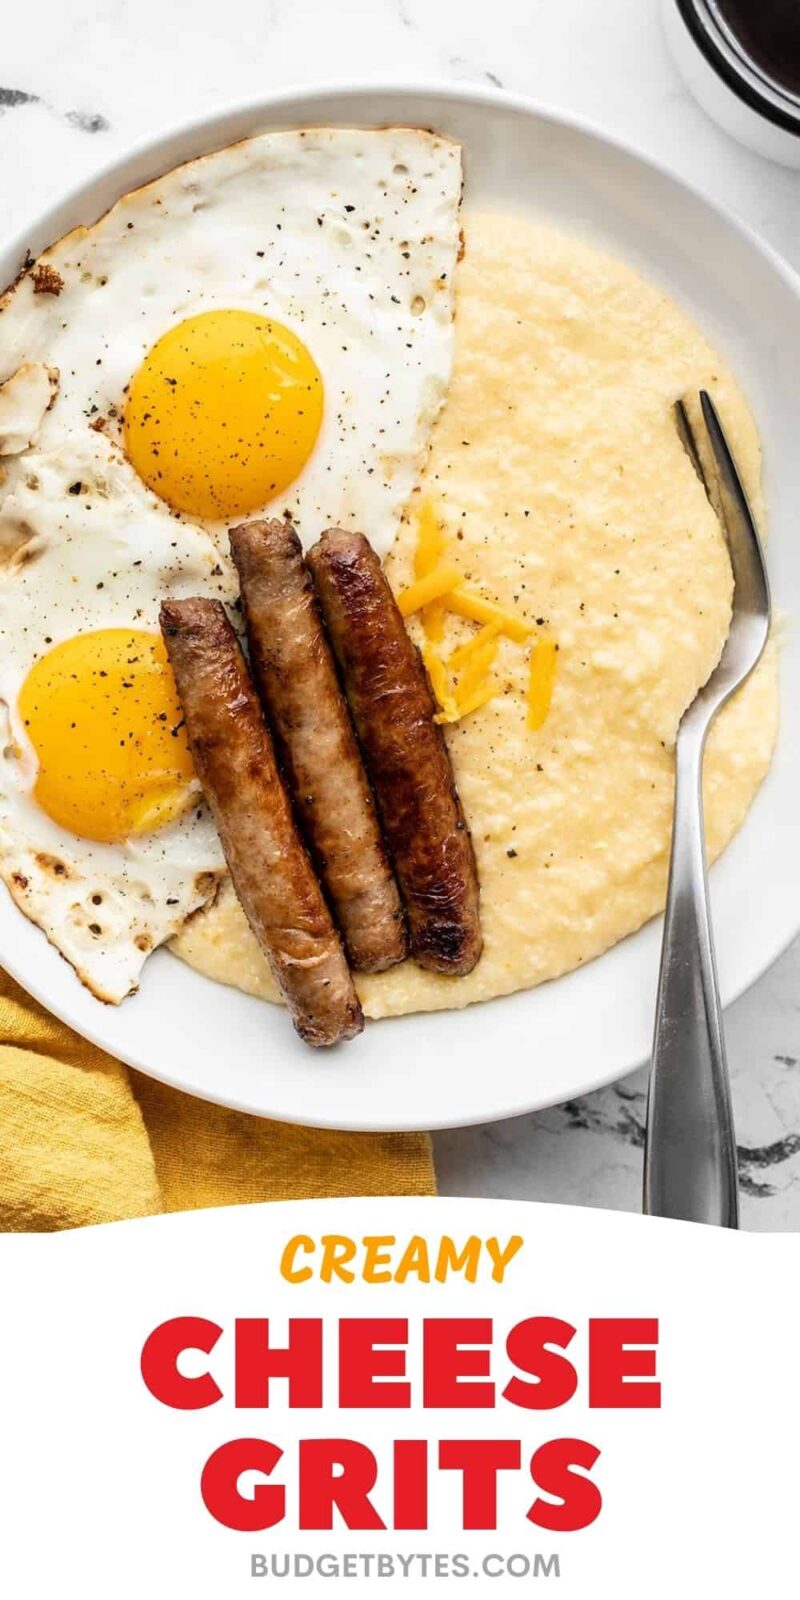 cheese grits on a plate with eggs and sausage, title text at the bottom